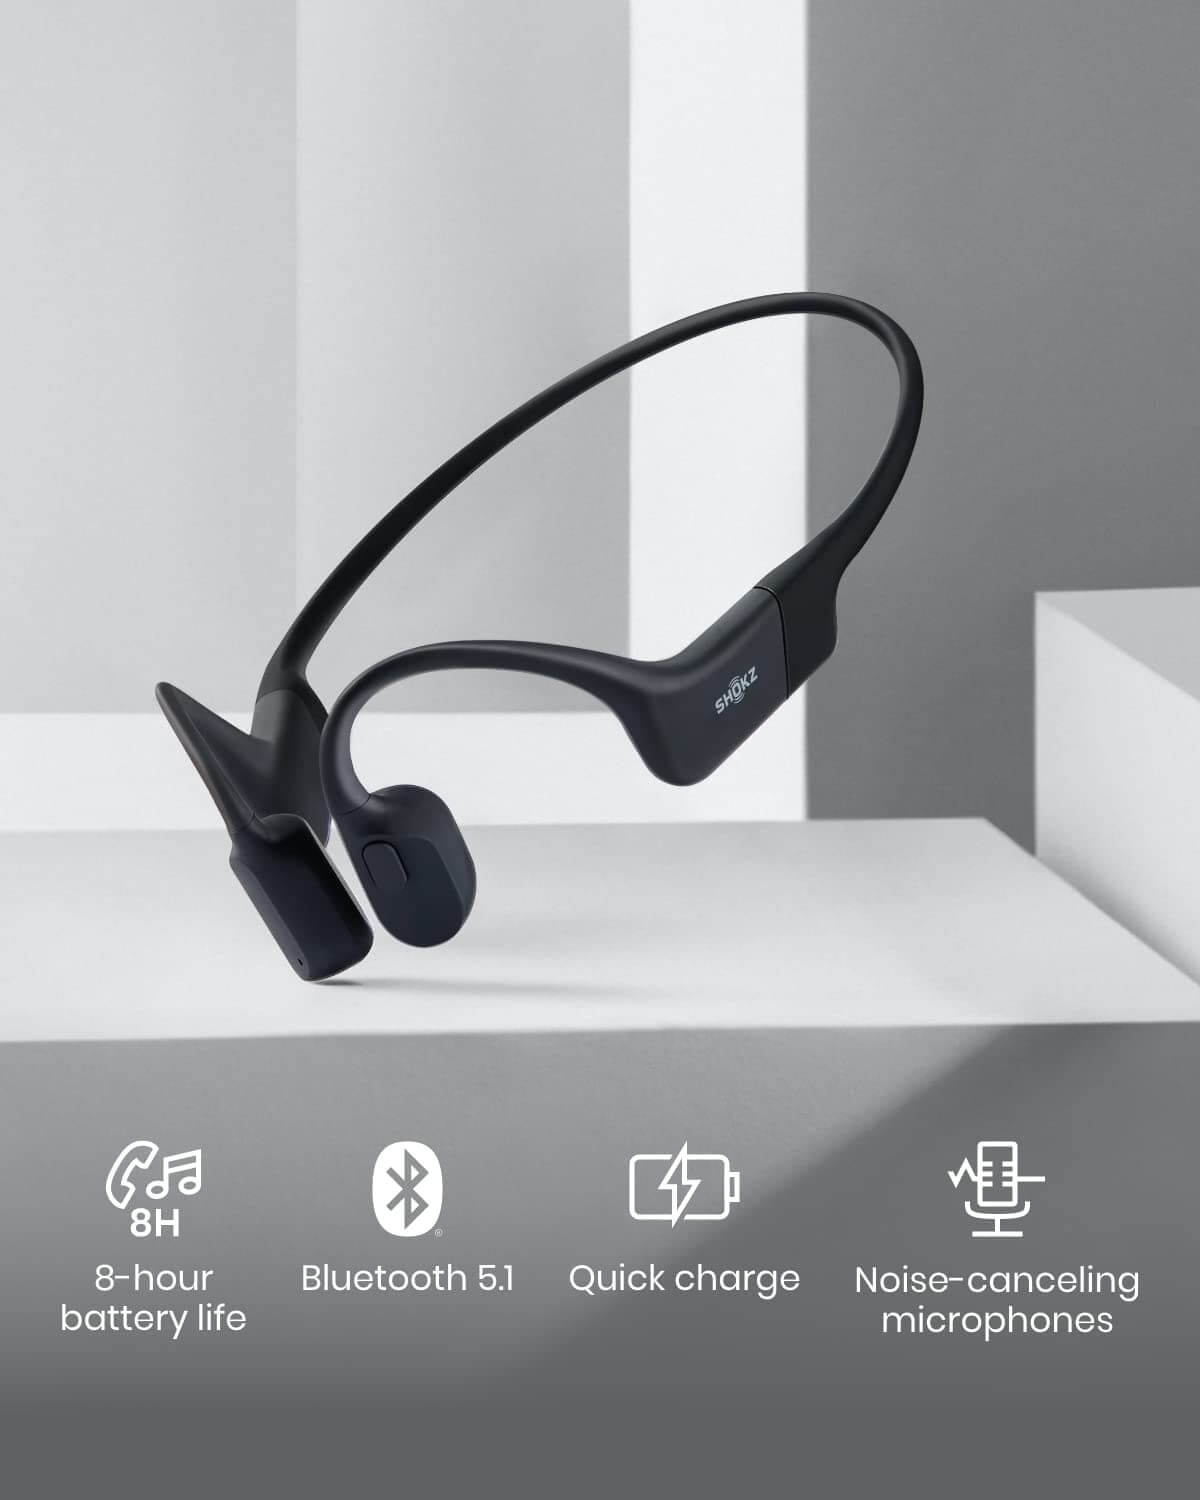 shokz openrun mini showing 8 hours of battery life, with quick charge, noise-canceling microphones, with wireless Bluetooth 5.1 support